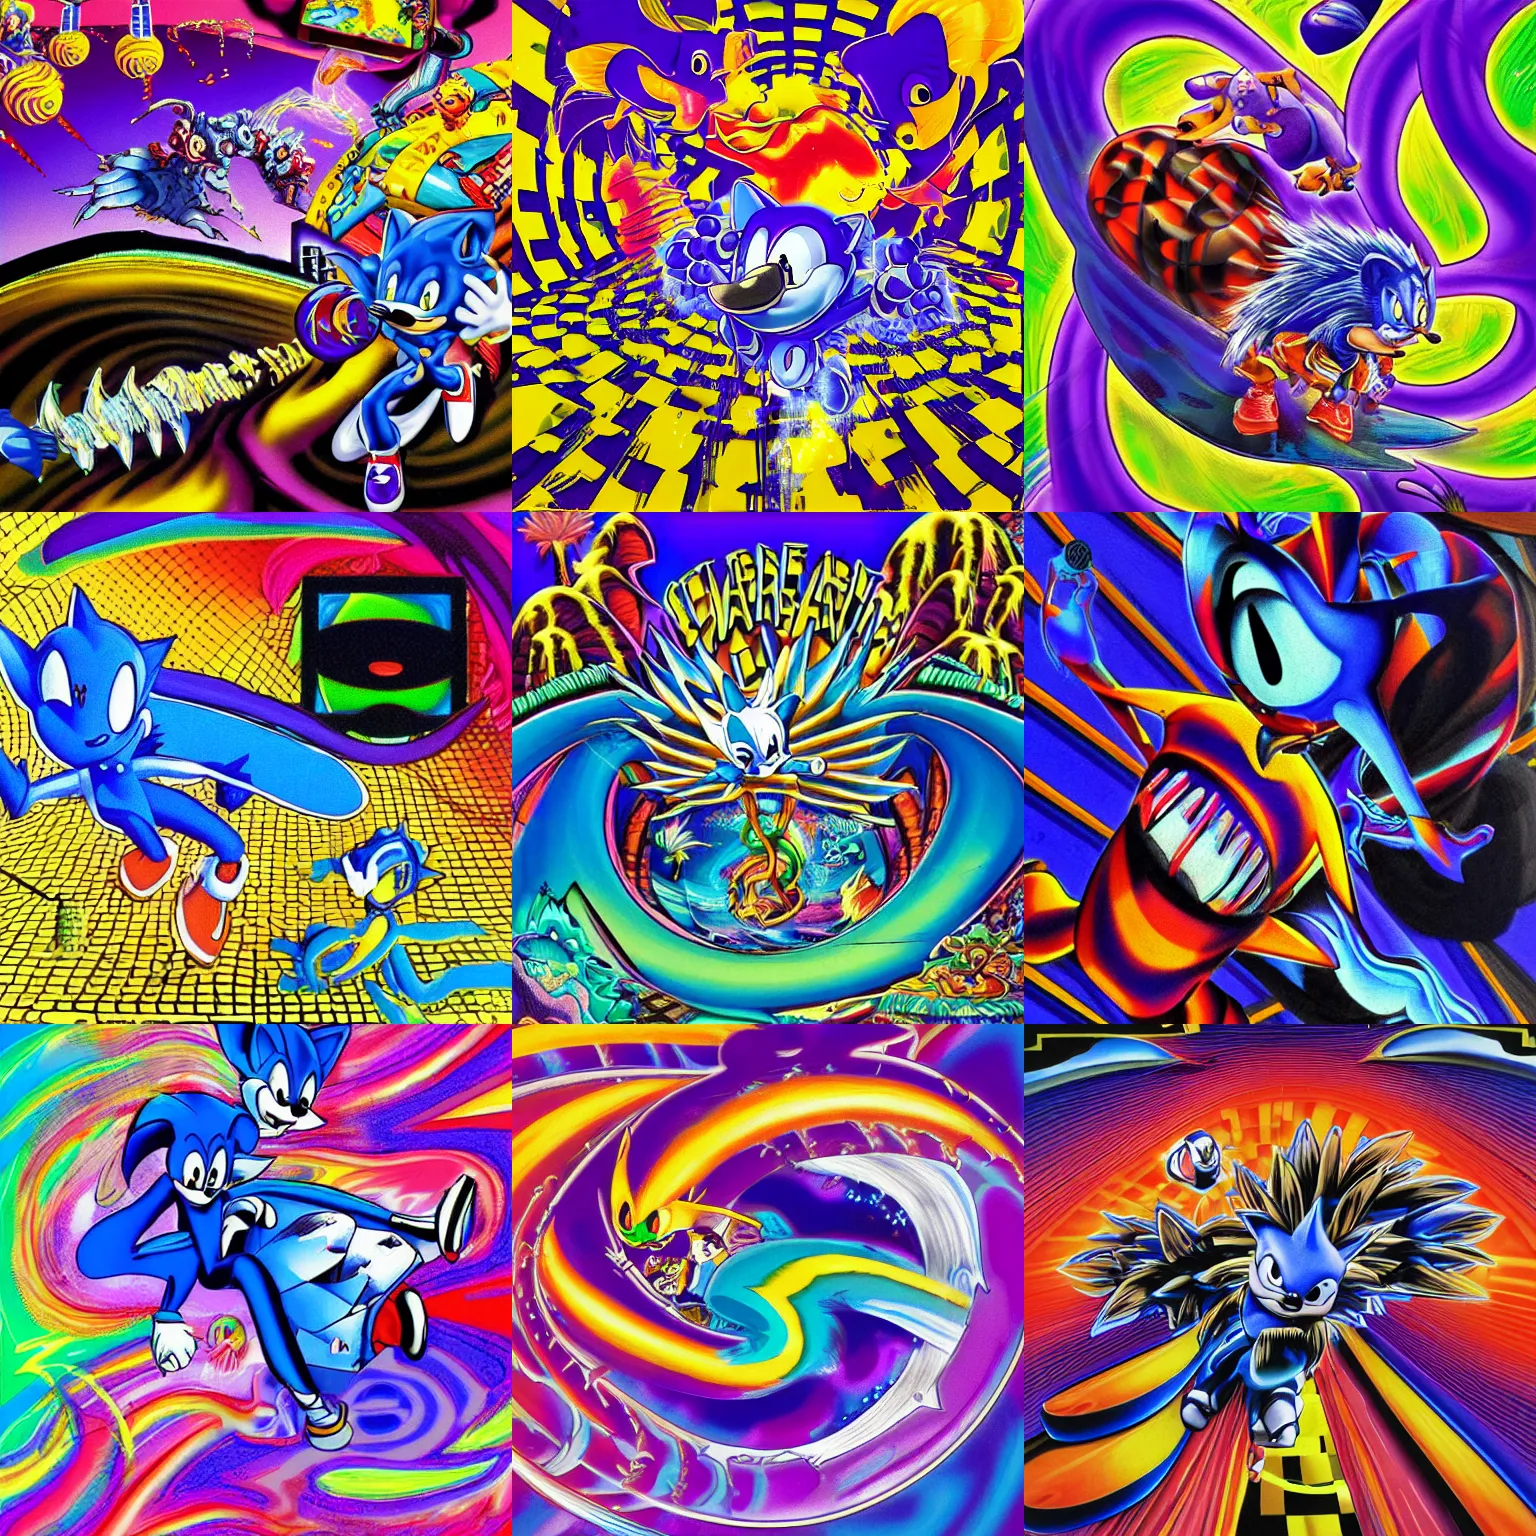 Prompt: surreal, recursive, sharp, detailed professional, high quality airbrush art MGMT album cover portrait of a liquid dissolving LSD DMT blue sonic the hedgehog surfing through a special stage, purple checkerboard background, 1990s 1992 Sega Genesis video game album cover